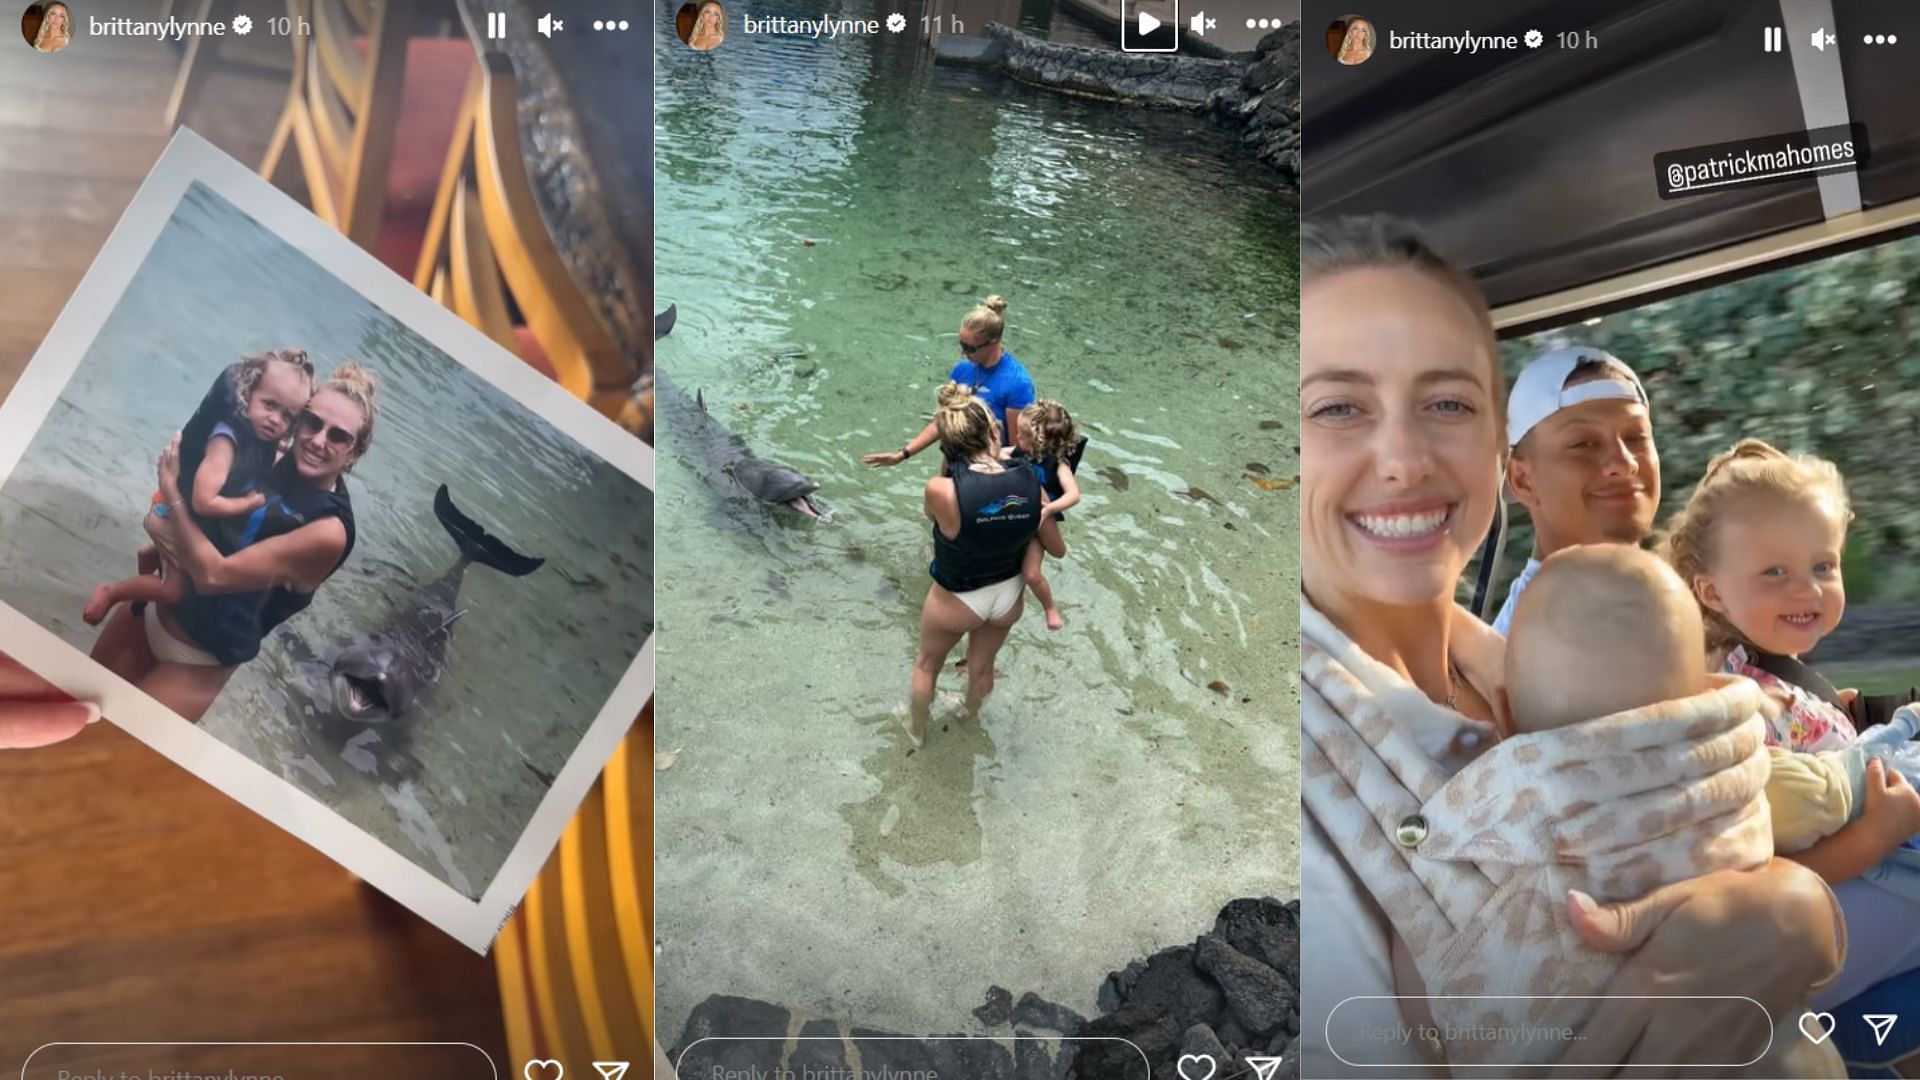 Brittany Mahomes and her daughter Sterling Skye shared an unforgettable moment with a dolphin. (Image Credit: Brittany Mahomes&#039; Instagram Story)